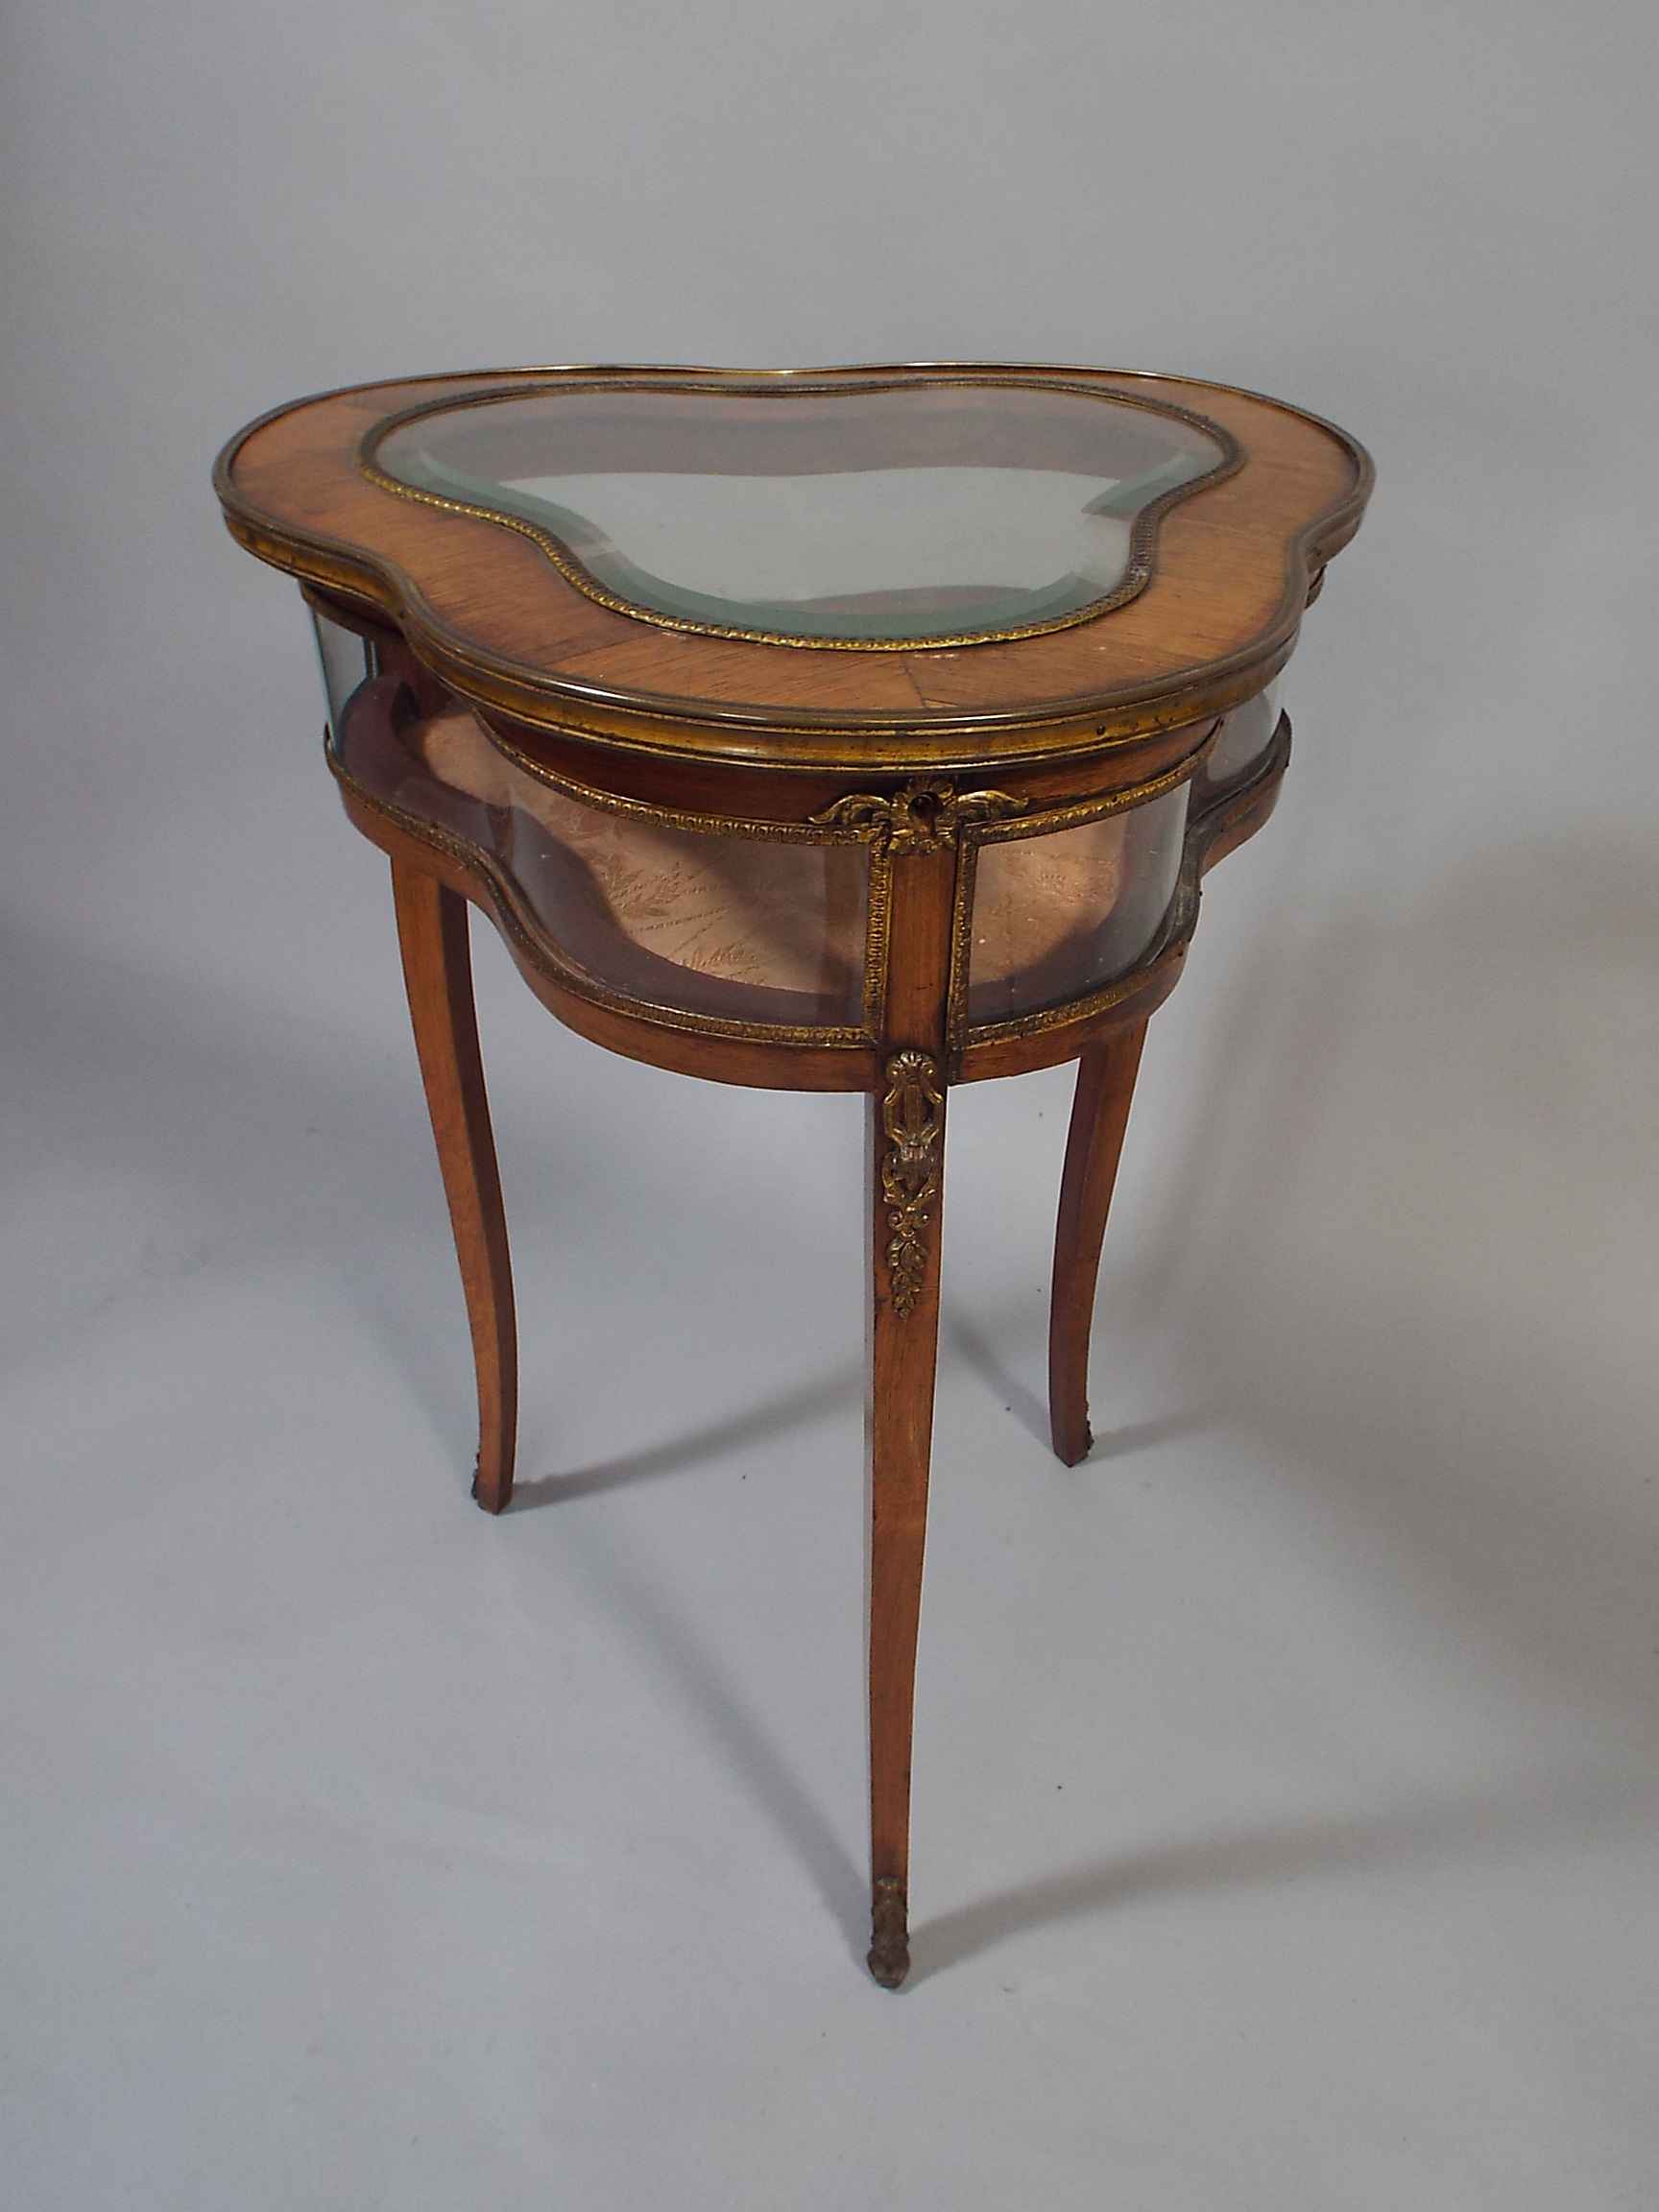 A Pretty French Ormolu Mounted Rosewood Bijouterie Table with Clover Leaf Top on Cabriole Legs.